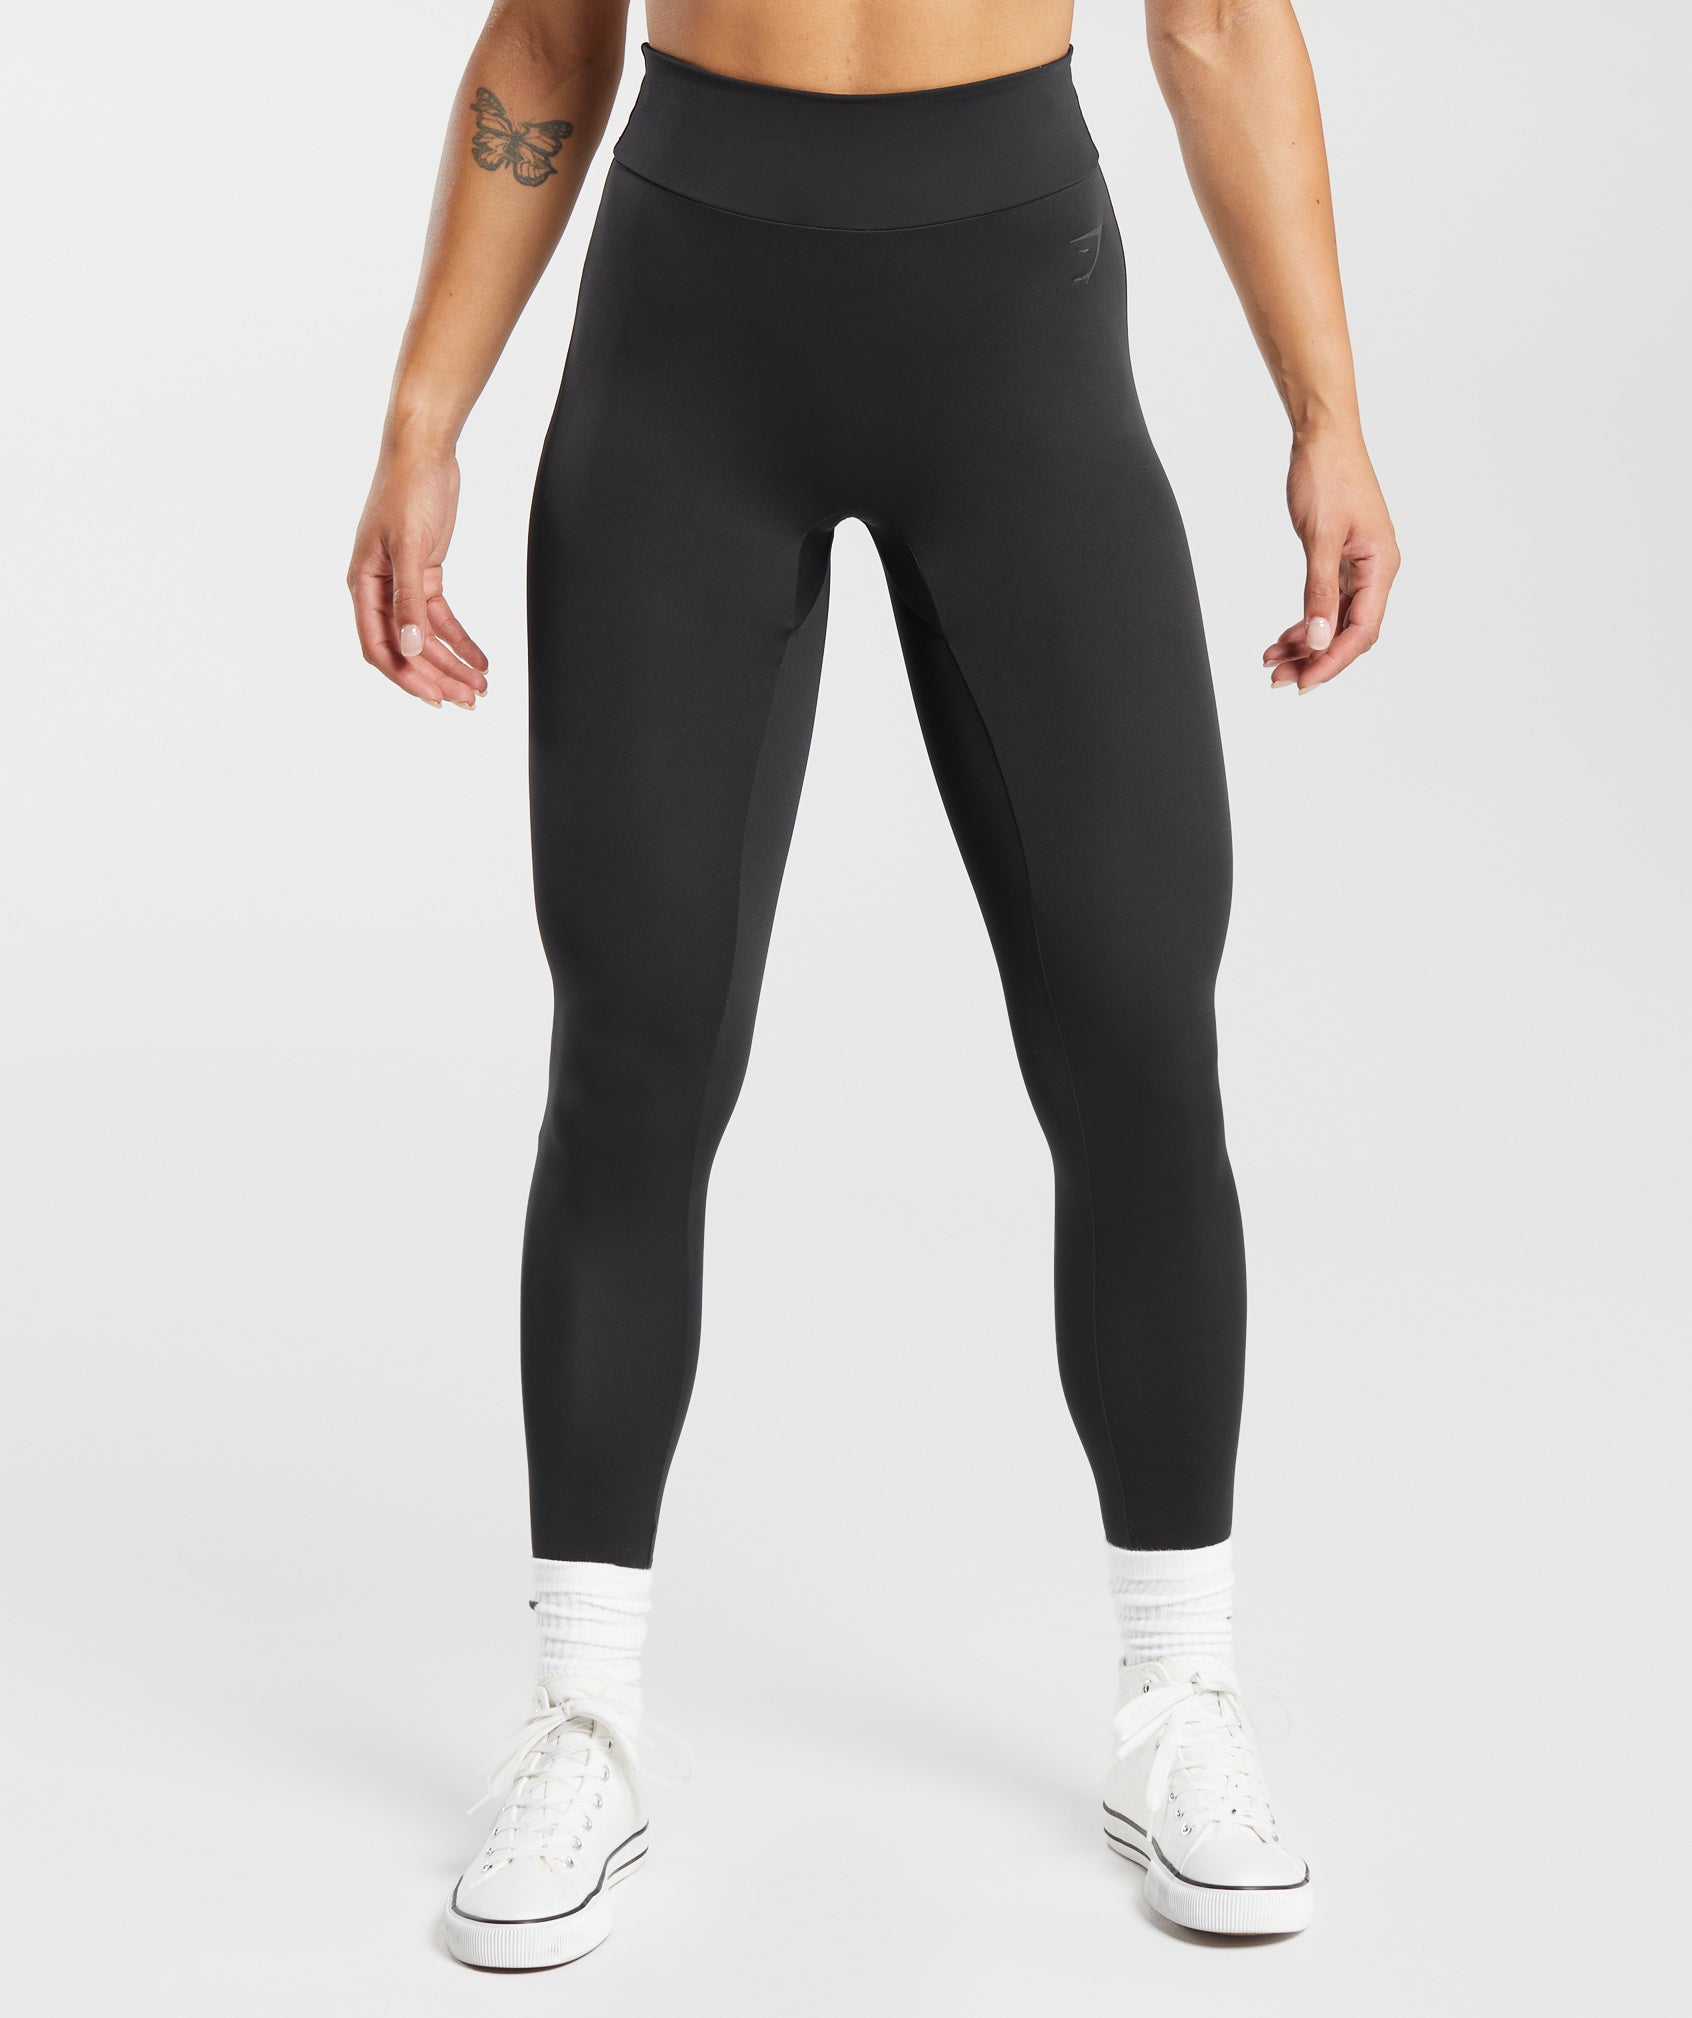 GS Power Regular Leggings in {{variantColor} is out of stock